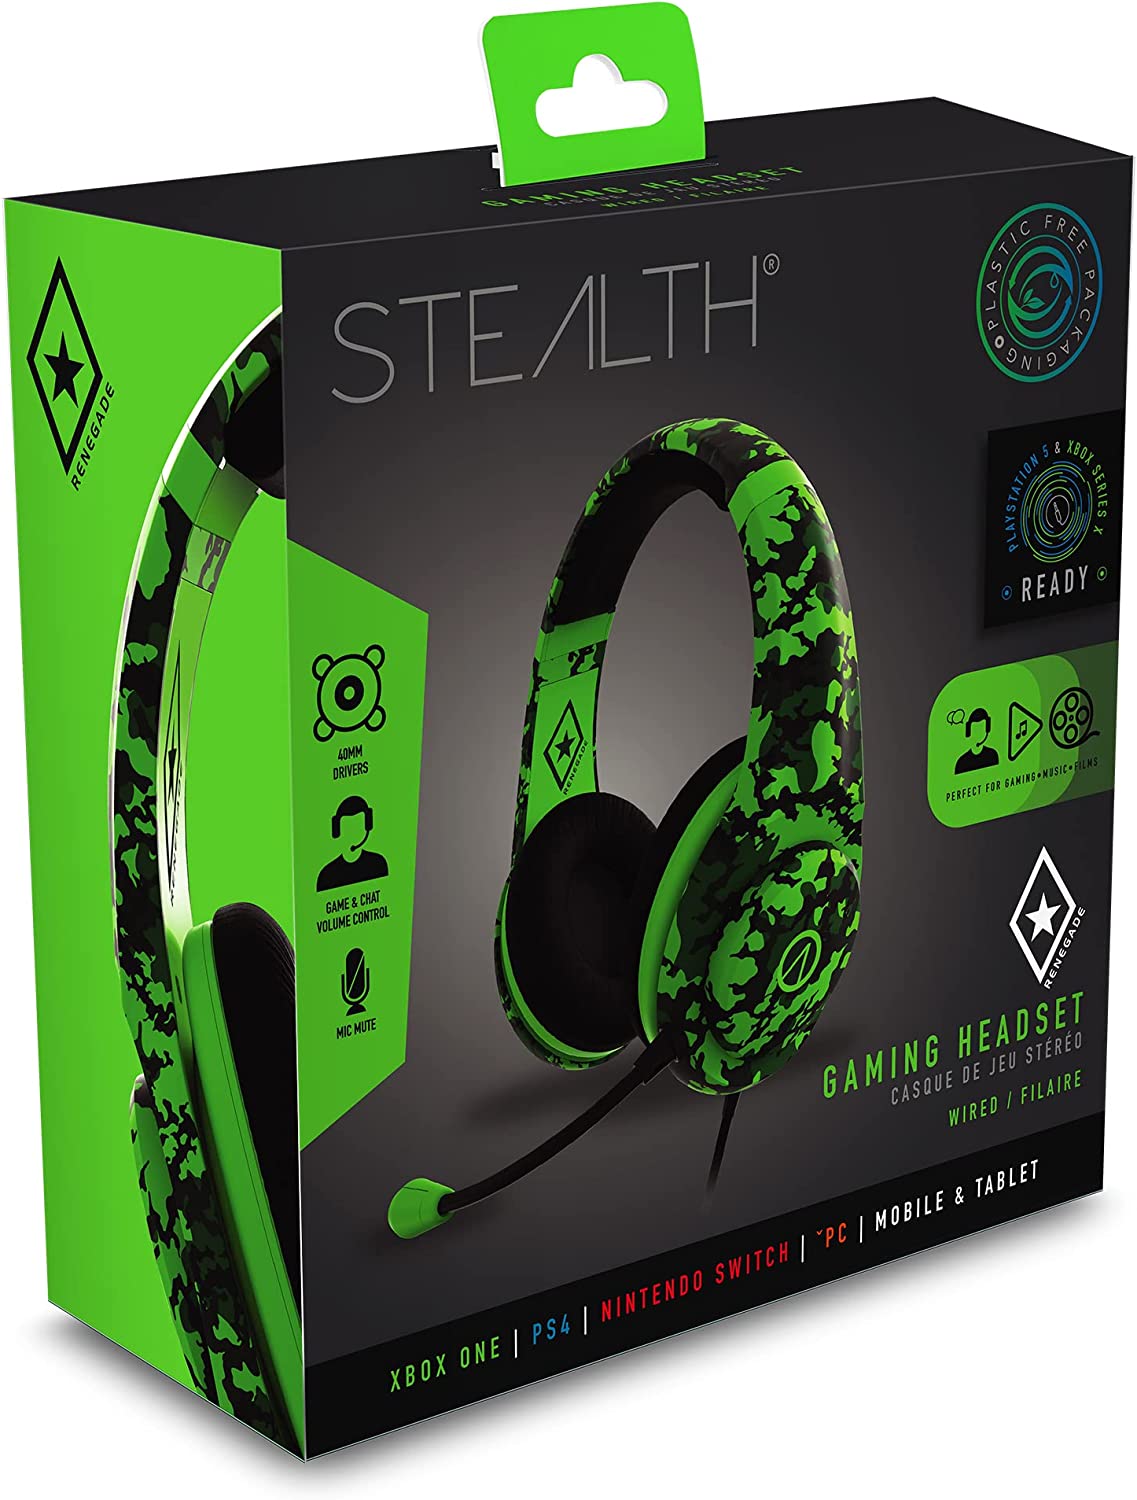 Stealth Renegade Gaming Headset (Neon Green Camo)